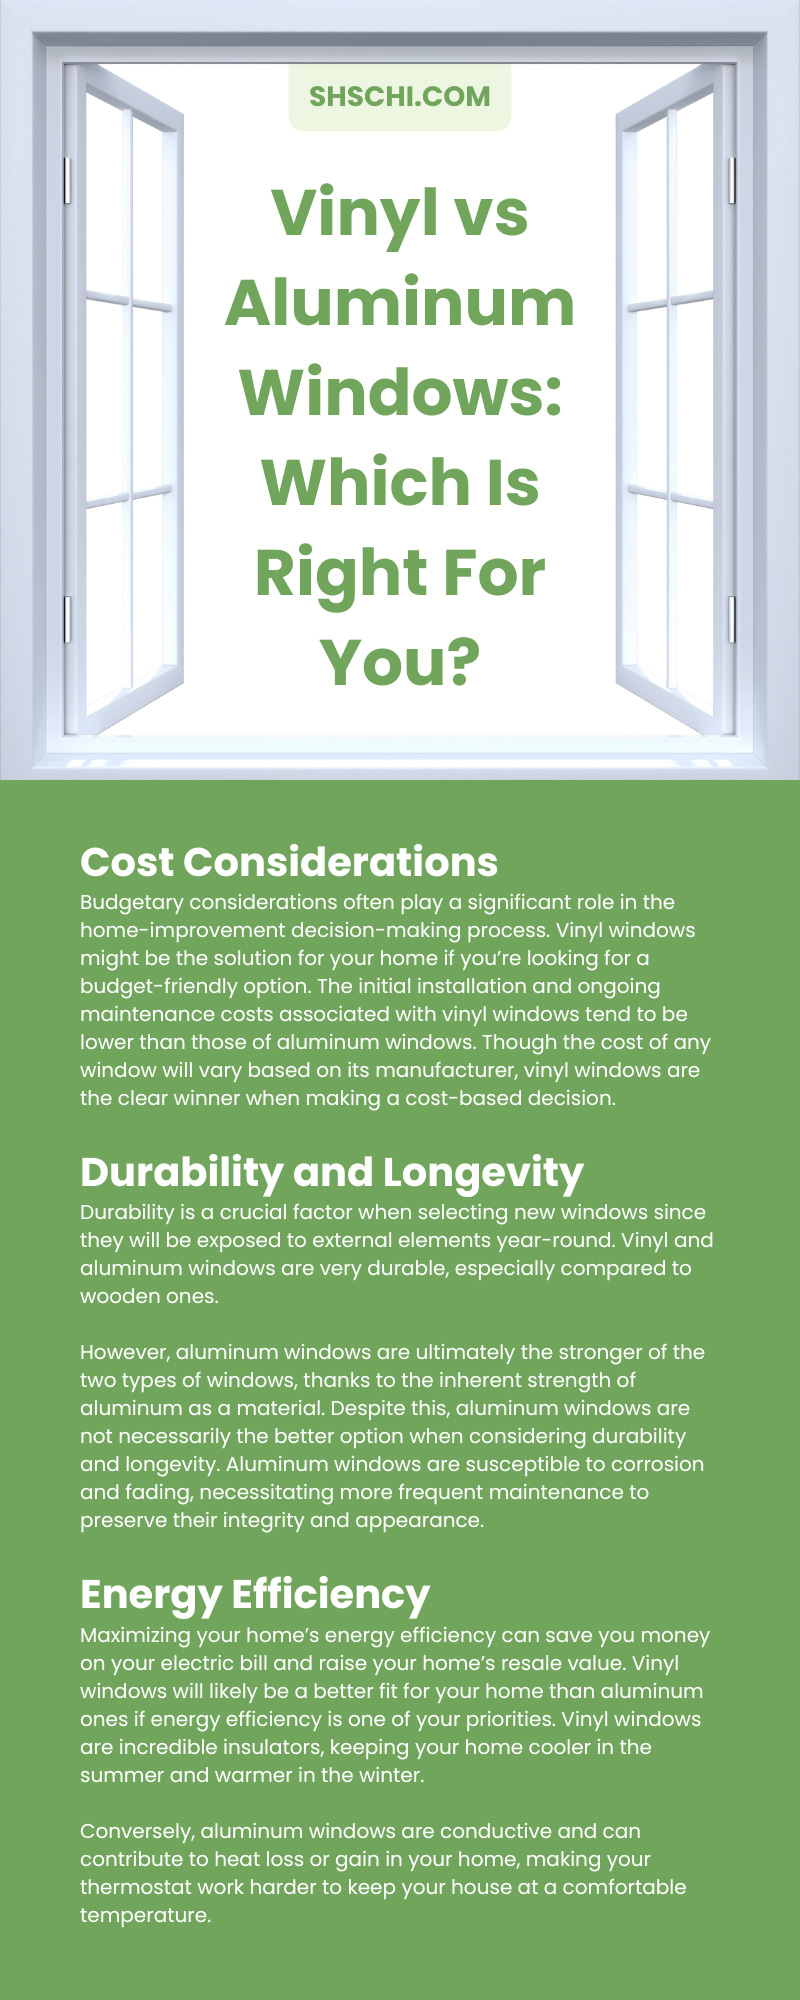 Vinyl vs Aluminum Windows: Which Is Right For You?
